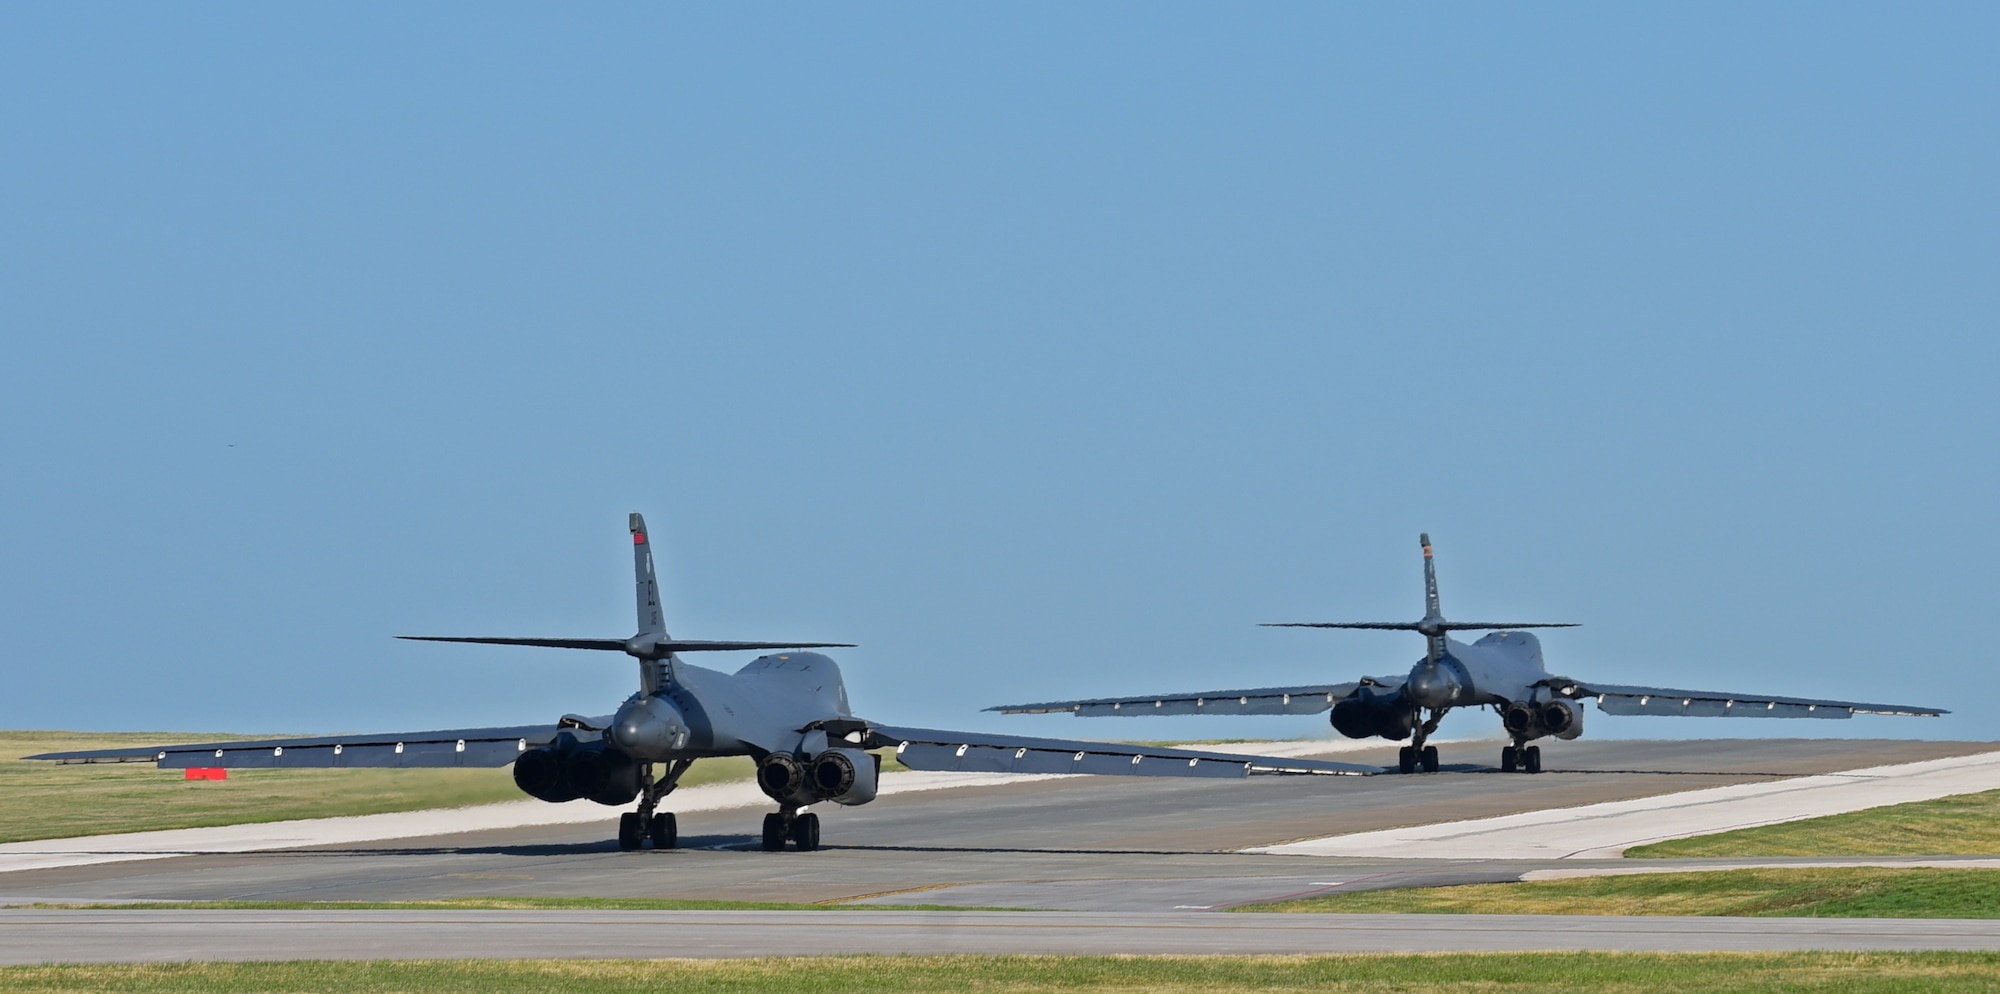 Two Ellsworth B-1s leave for Wright-Patterson Air Force Base, Ohio from Ellsworth Air Force Base, S.D., April 14, 2017.  The B-1s and their crews are on their way to participate in the 75th Anniversary of the Doolittle Tokyo Raid commemoration events. (U.S. Air Force photo by Senior Airman James L. Miller) 